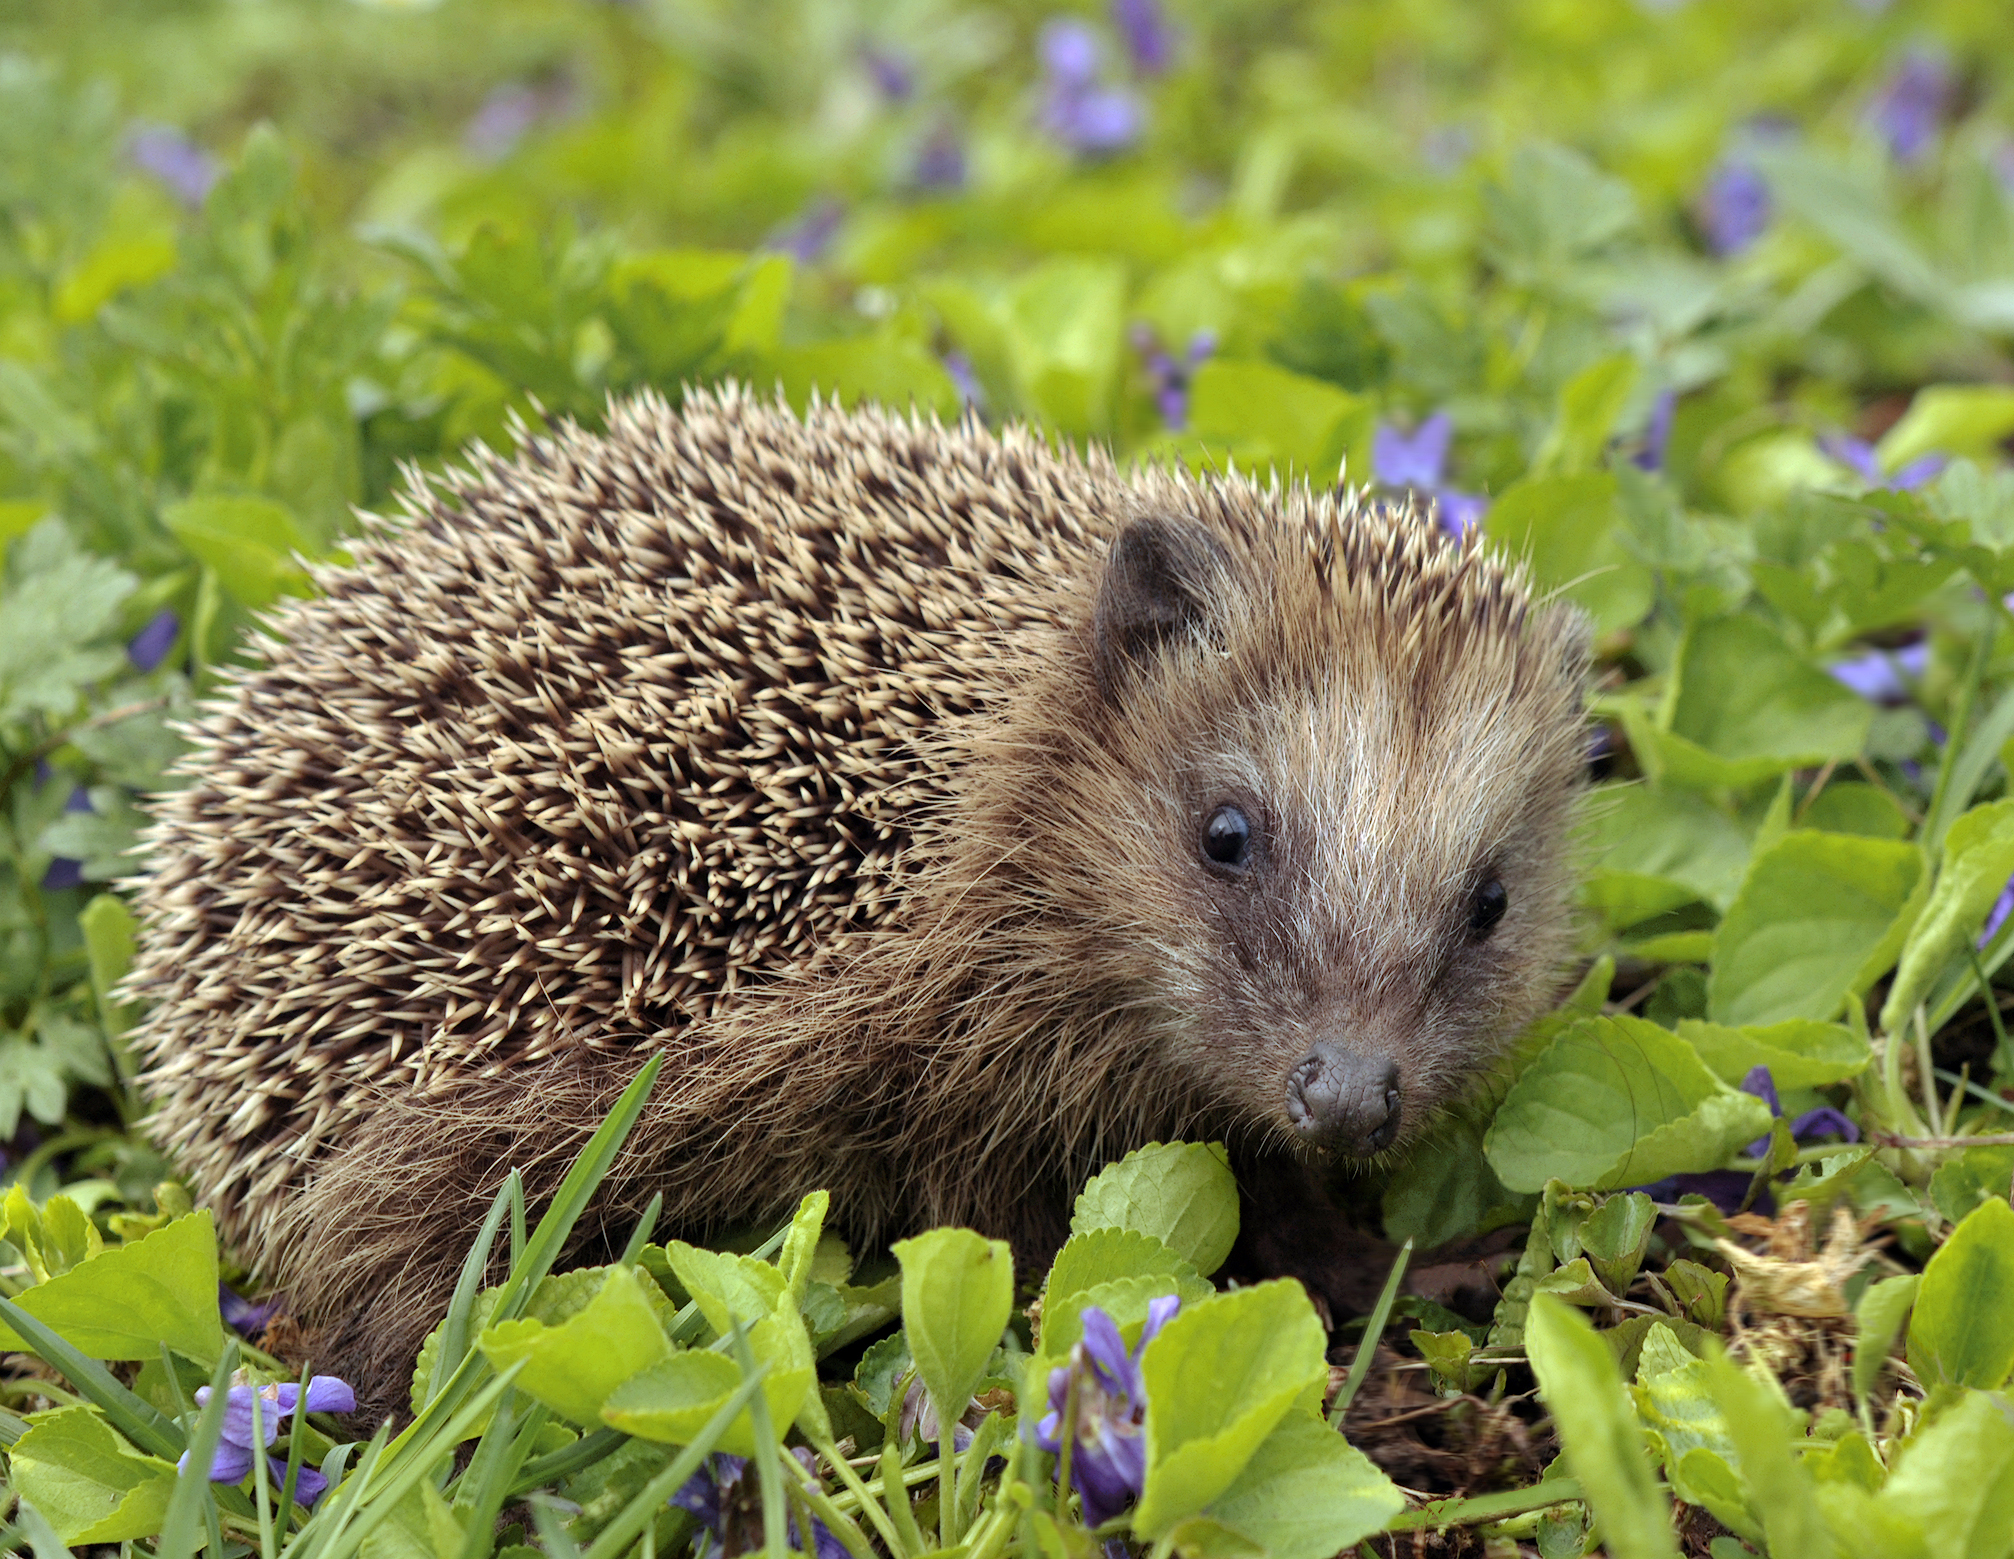 What is the largest breed of hedgehog?